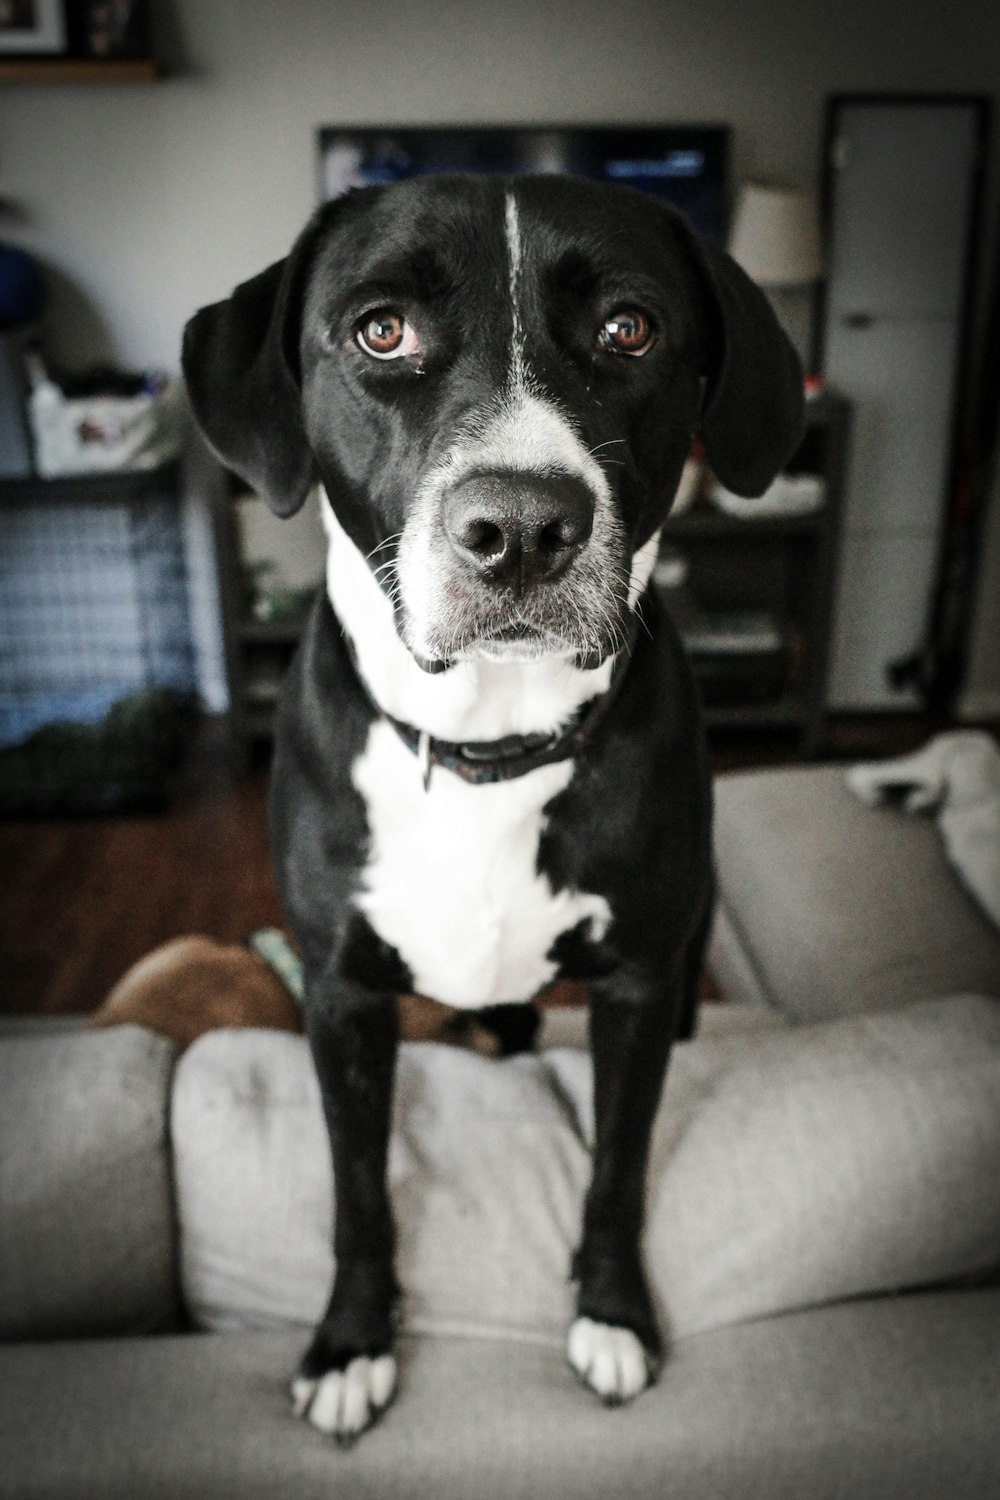 a black and white dog sitting on a couch